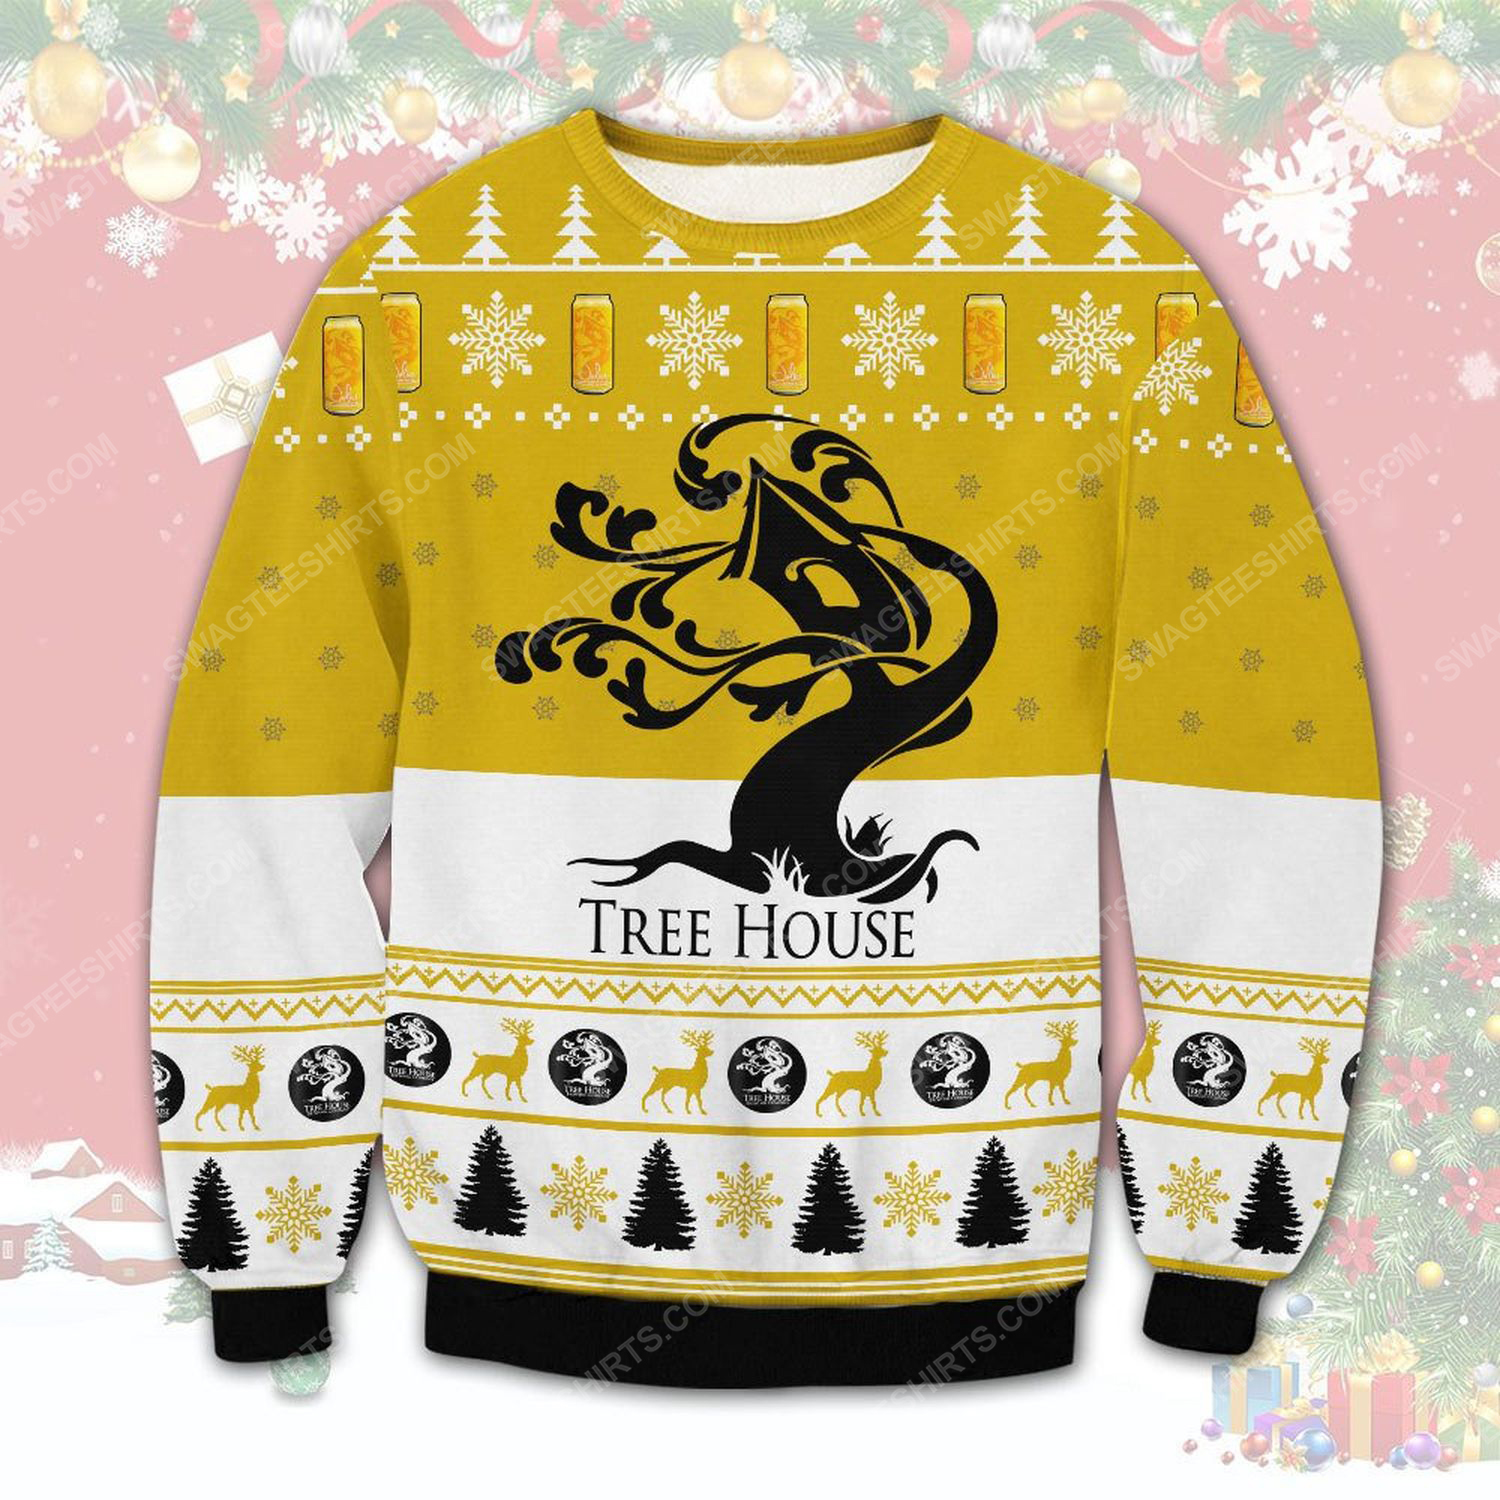 Tree house brewing companyugly ugly christmas sweater